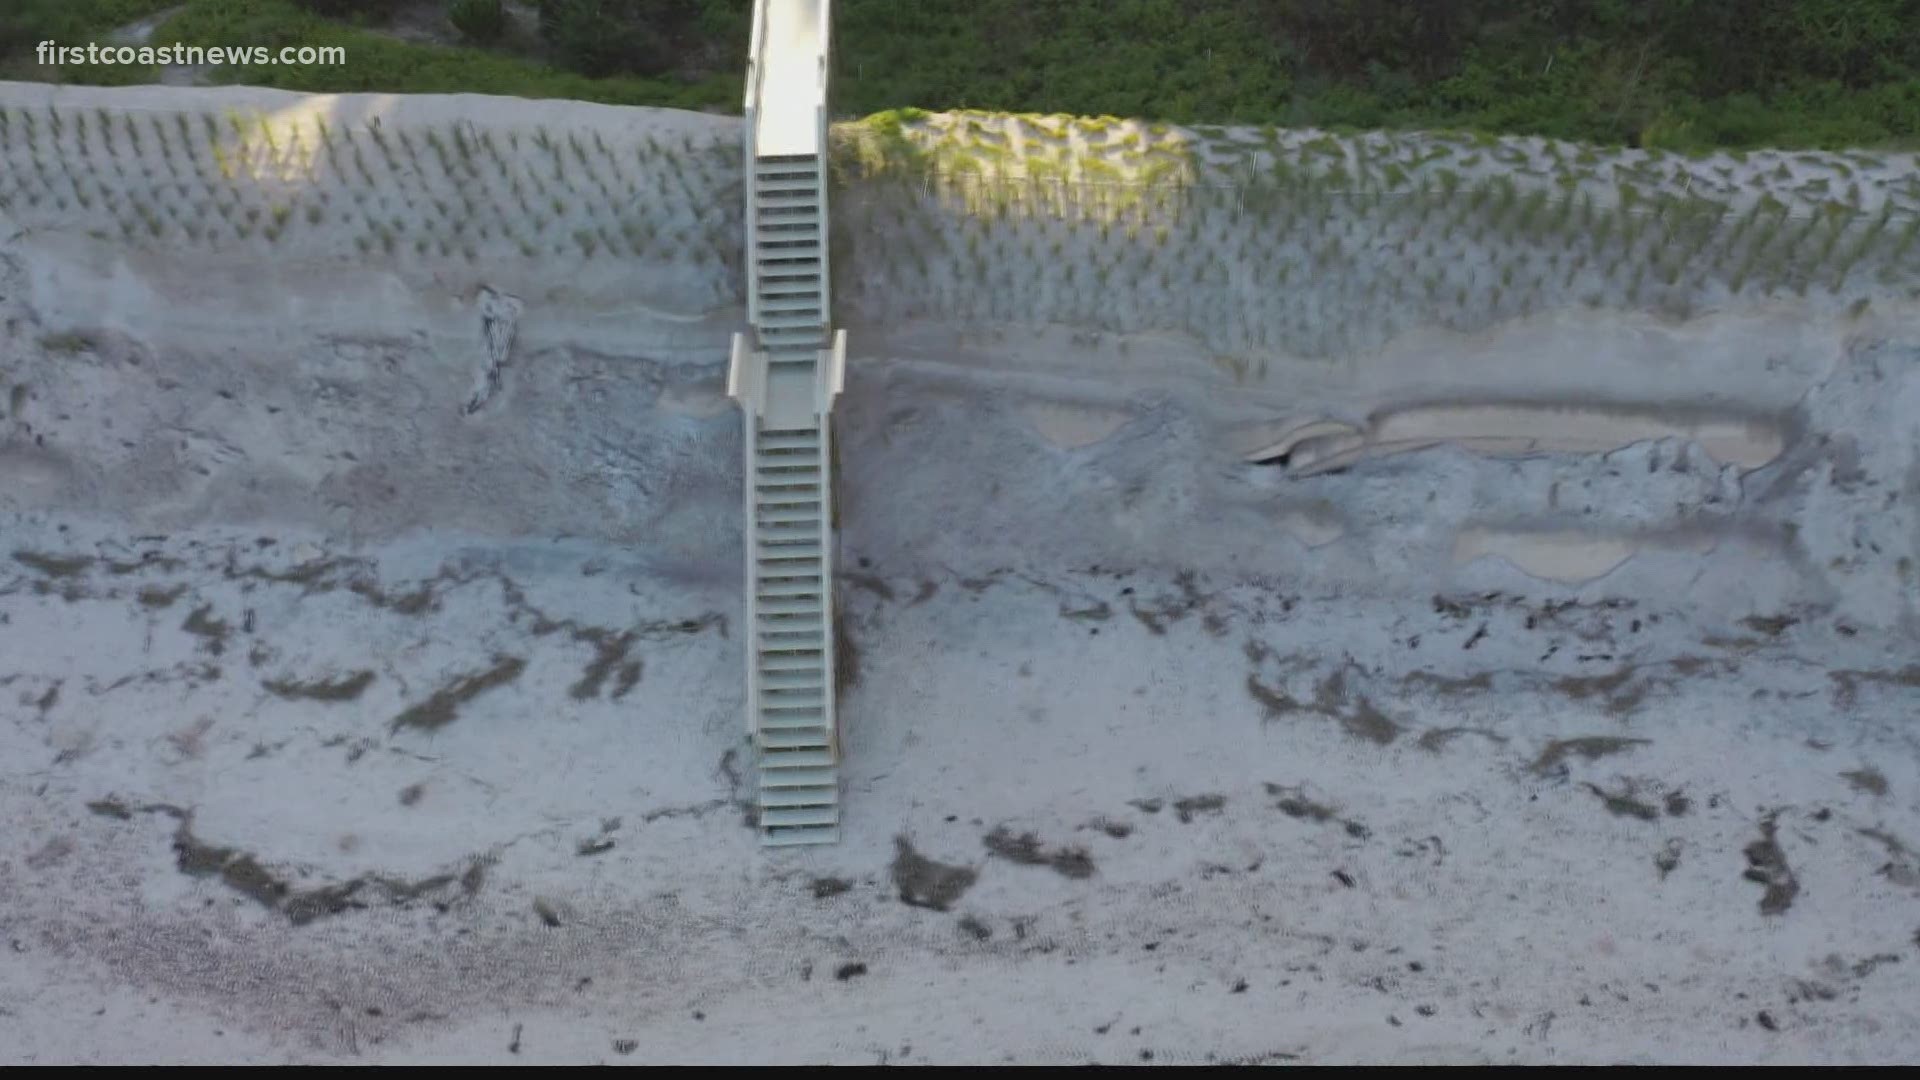 Homeowners say exposed beach reinforcement devices prove they were needed, opponents call their exposure an "epic fail."